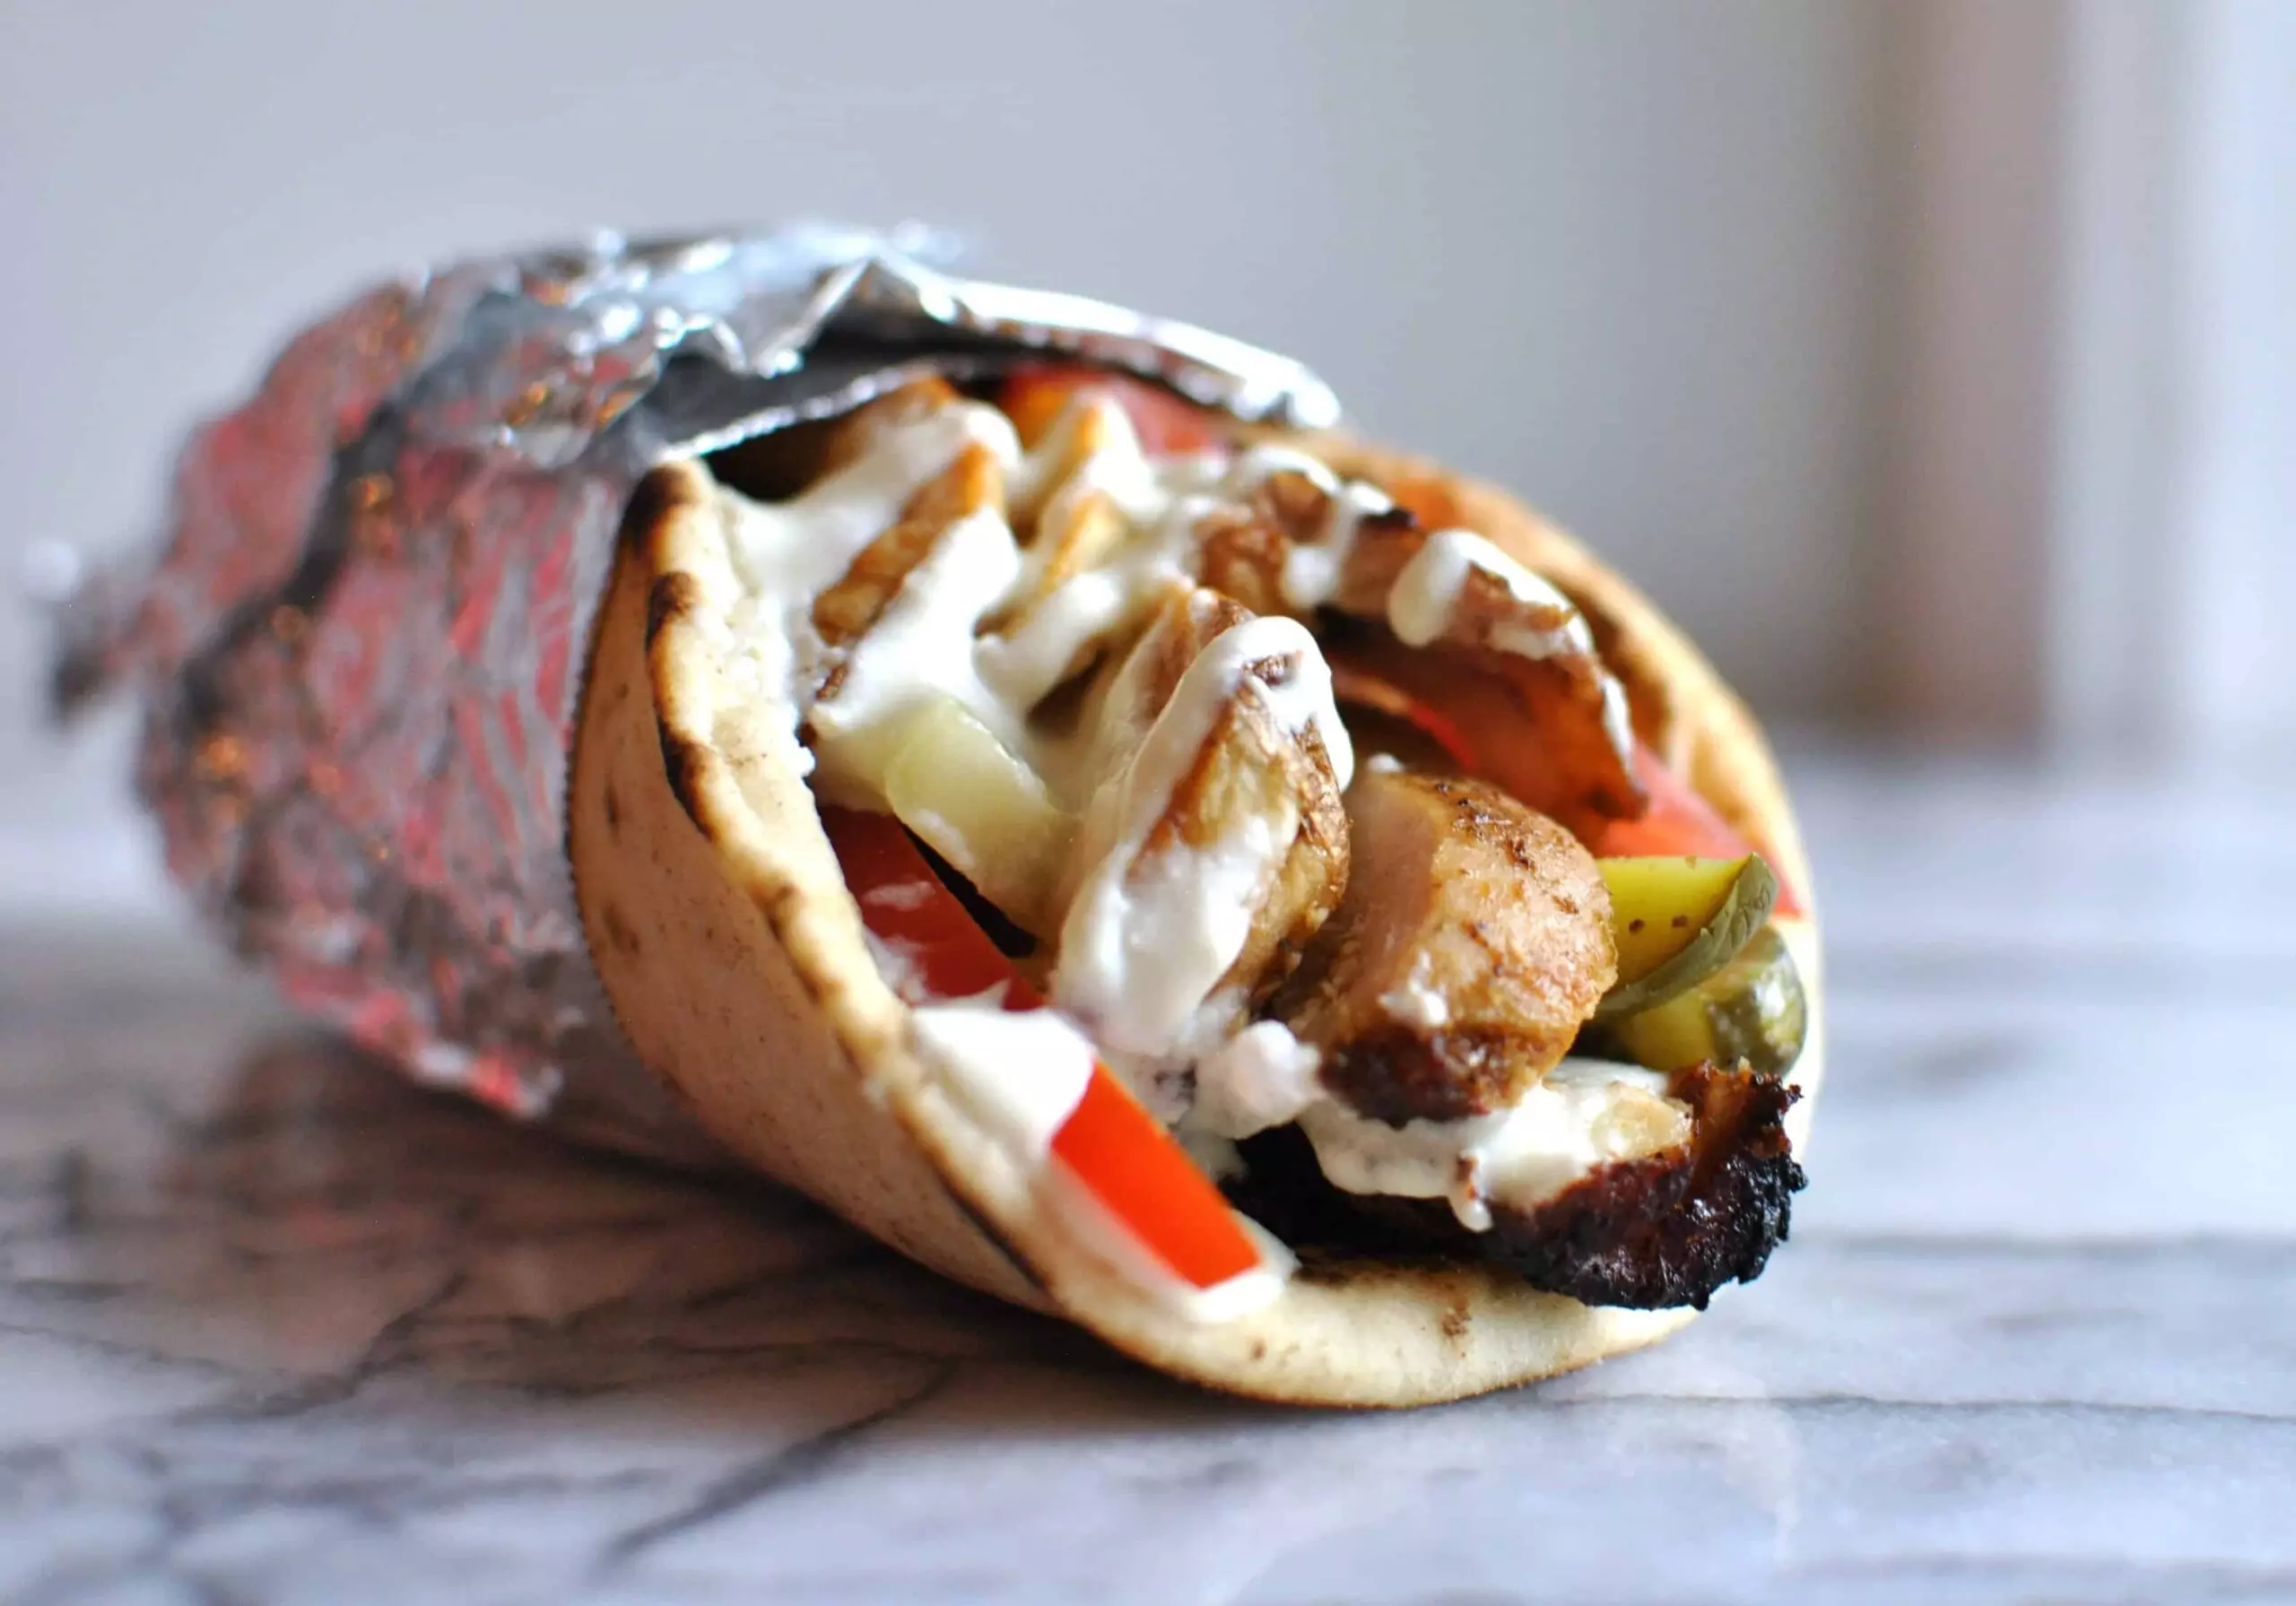 Shawarma Eatery in Hyderabad Shut Down After Food Poisoning Outbreak